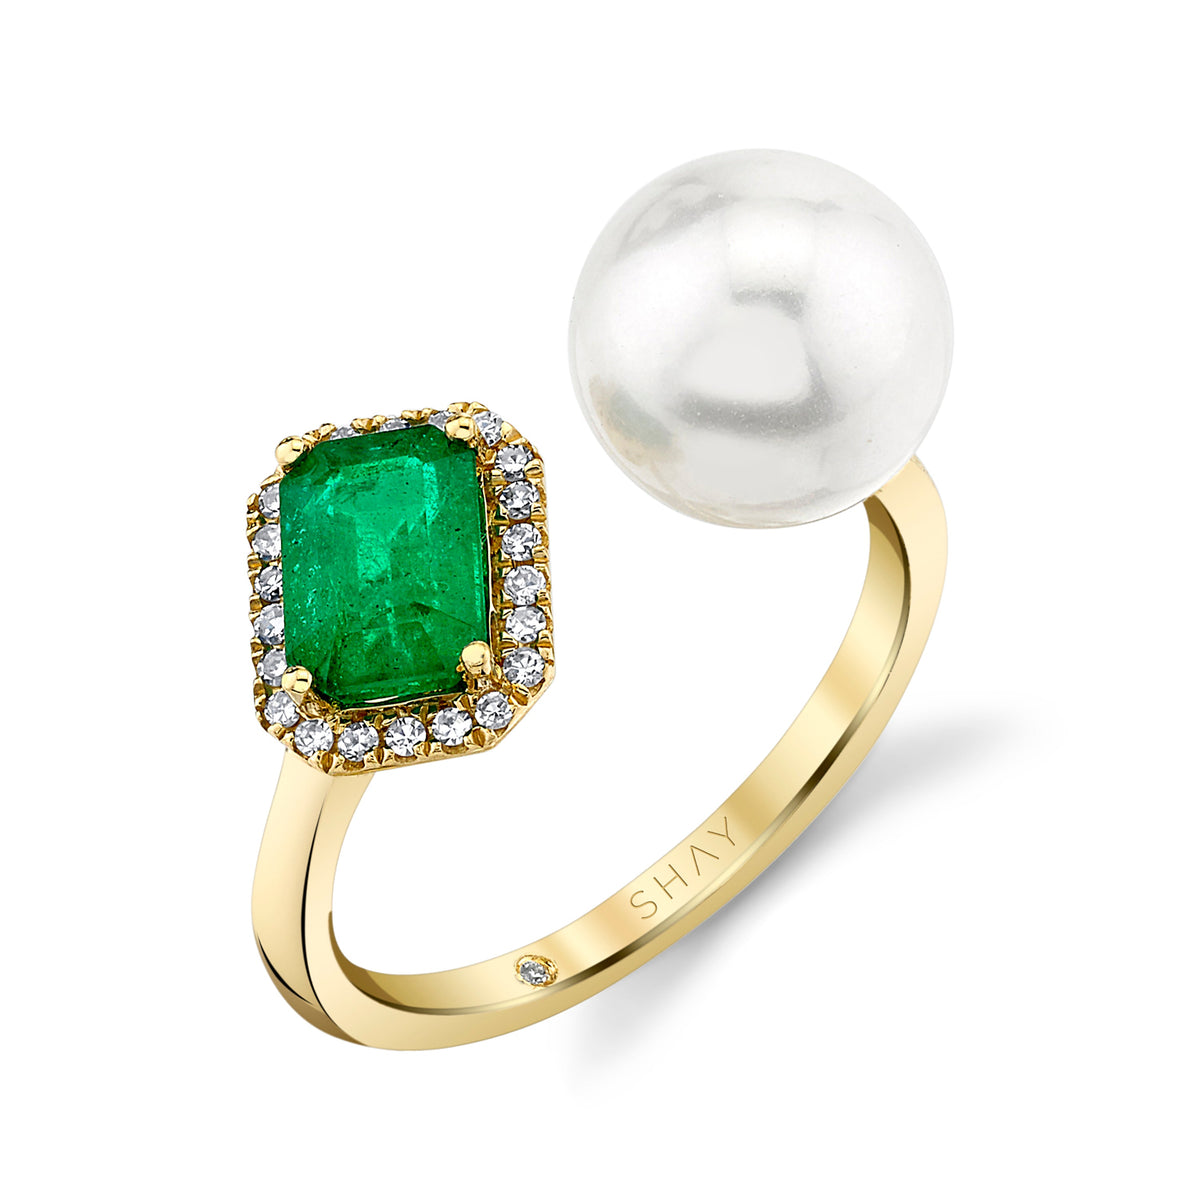 READY TO SHIP PEARL & EMERALD TILTED HALO TWIN RING